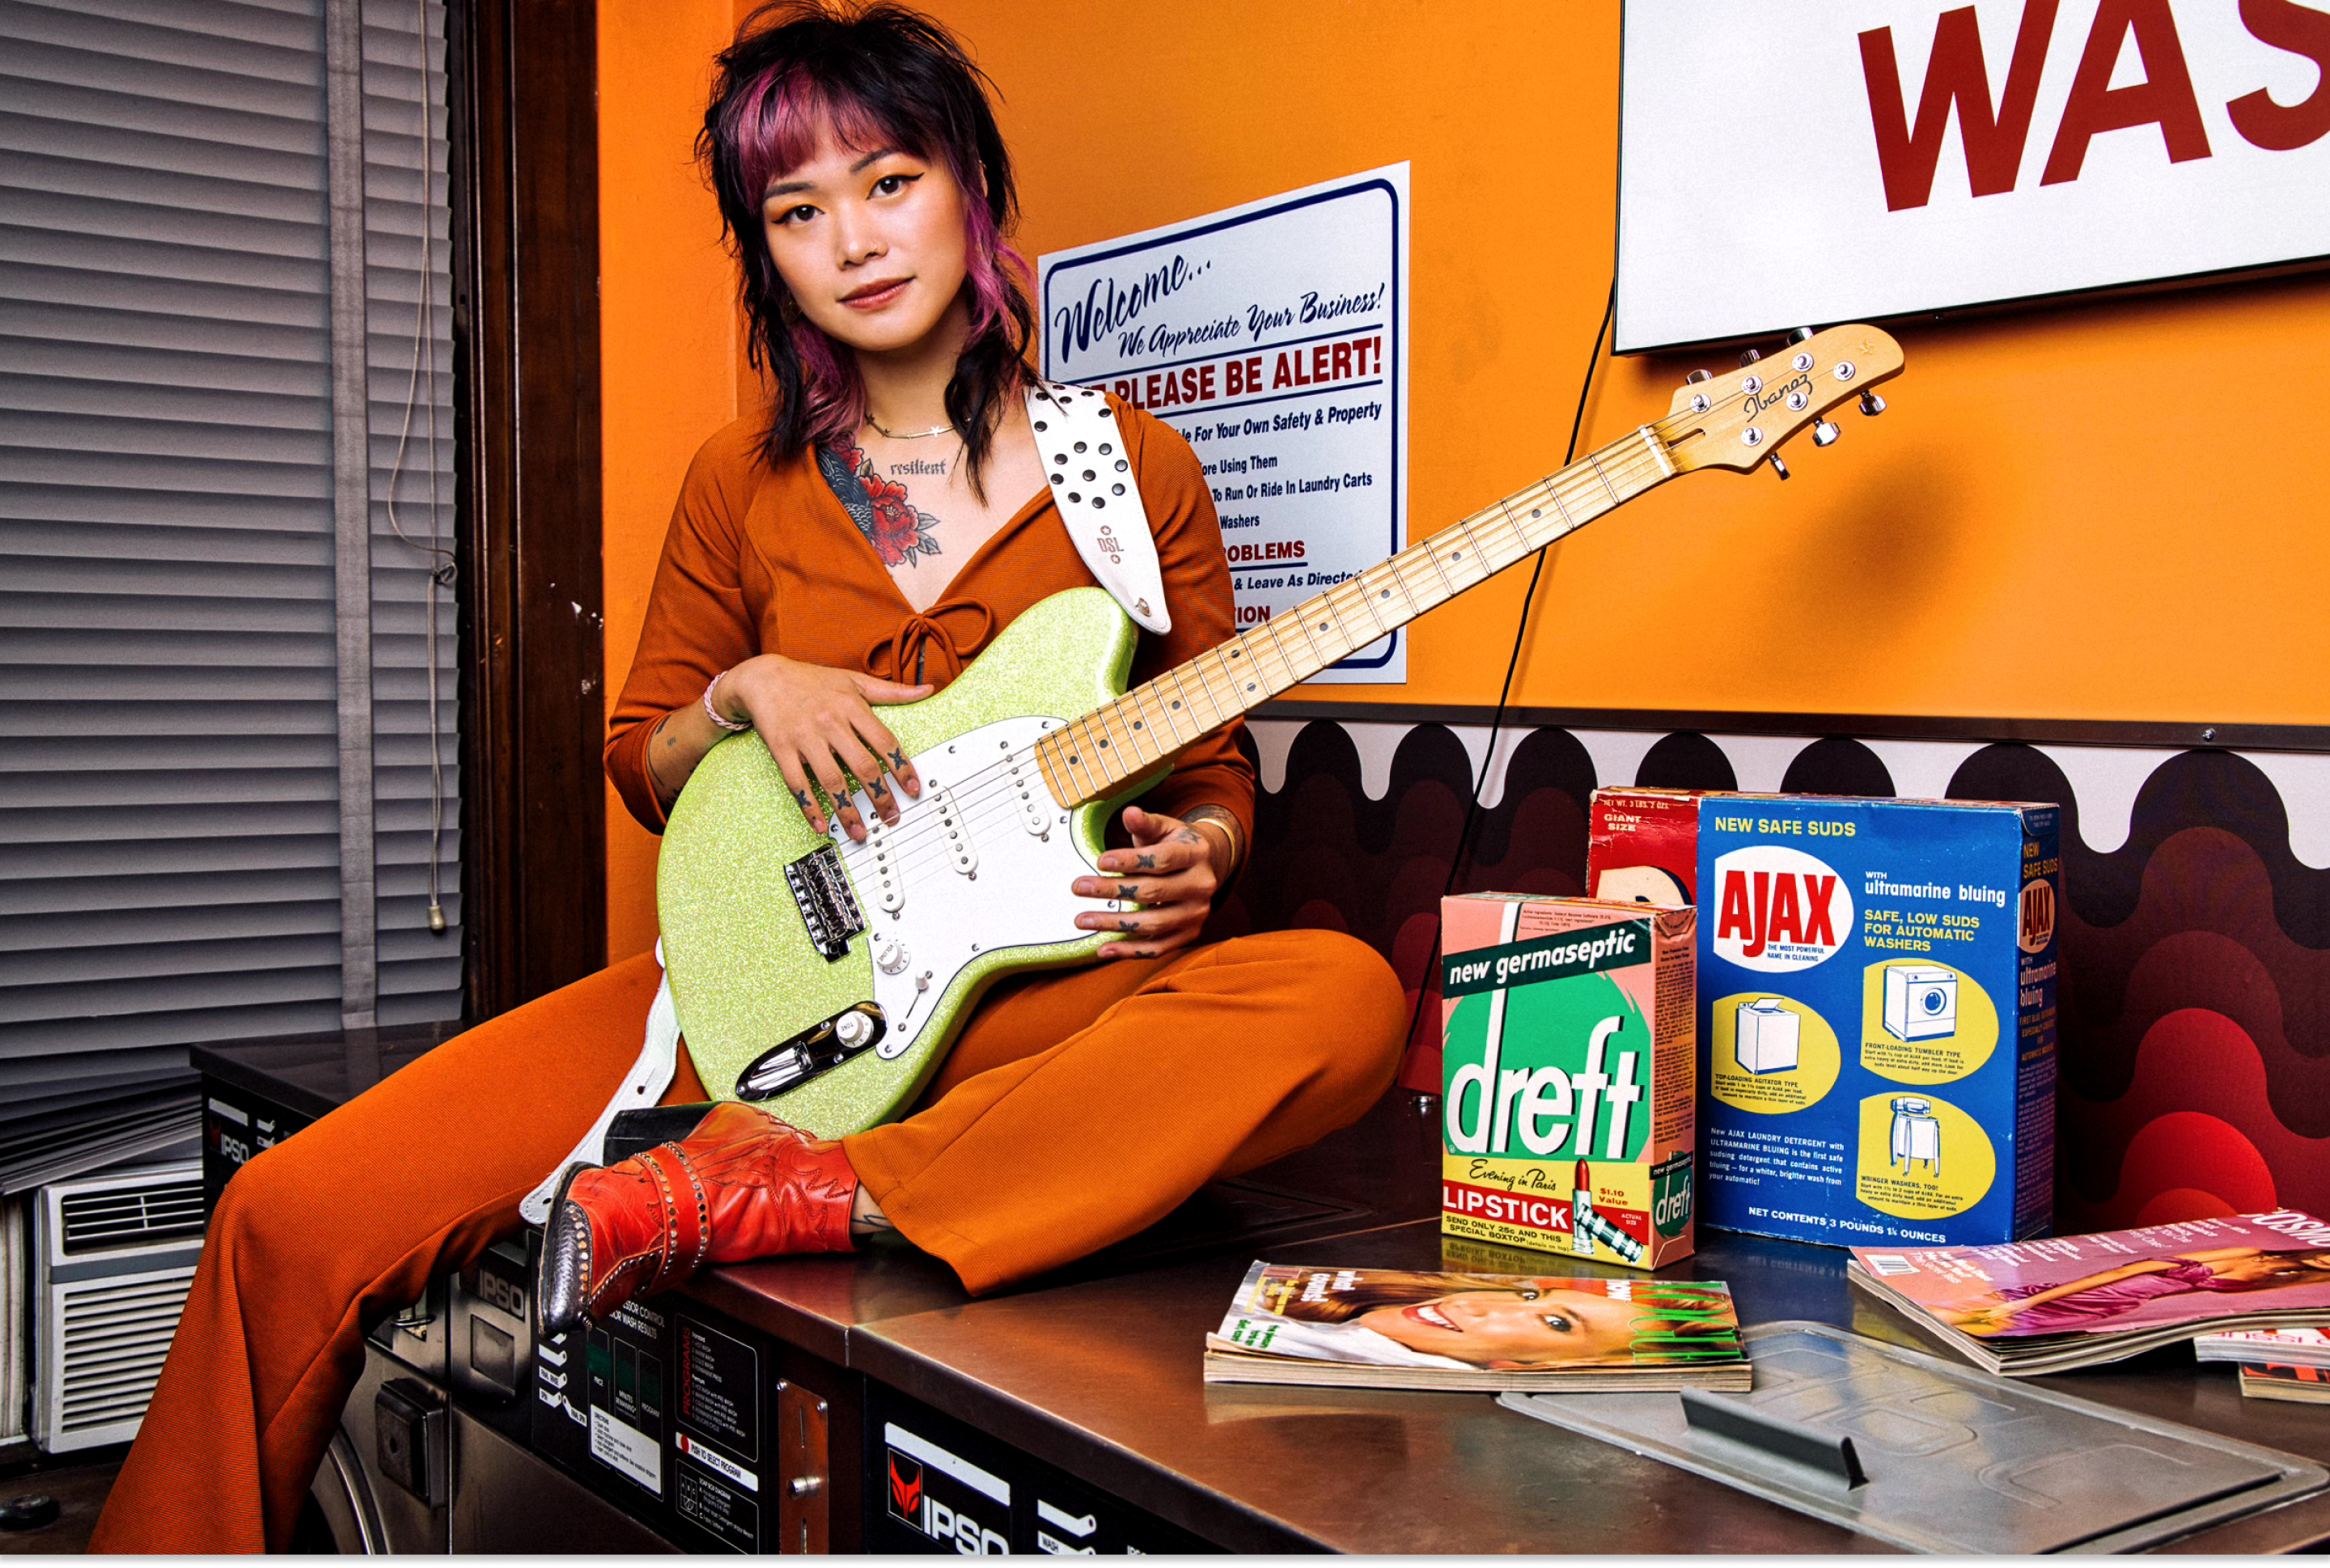 Yvette Young sat on top of a washing machine holding her guitar in a laundrette